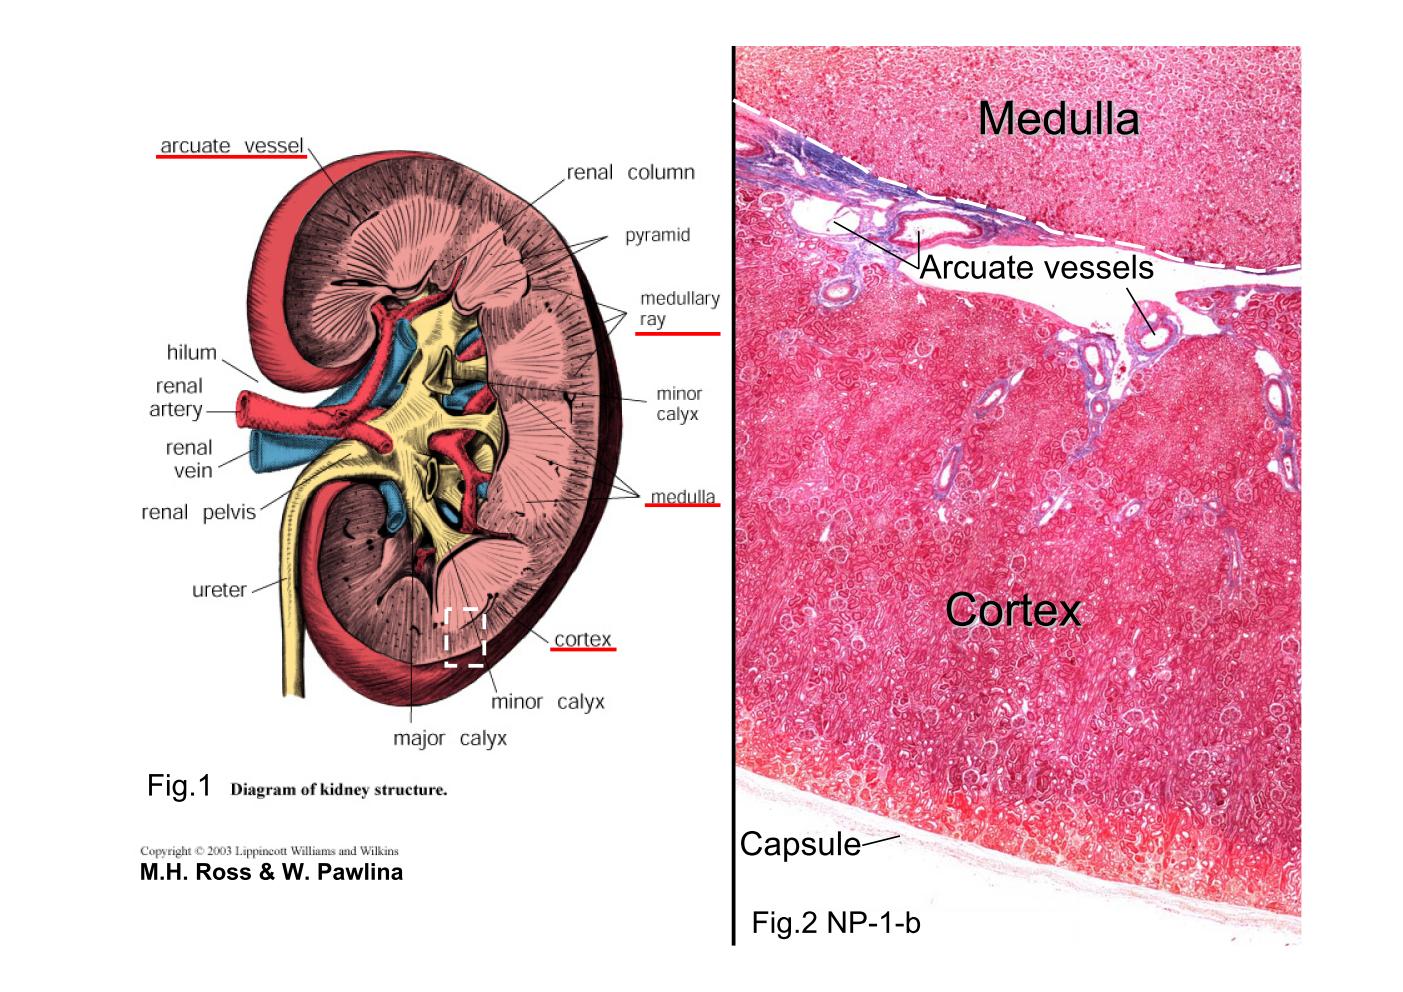 block8_04.jpg - Fig.1 Diagram of kidney structure. The diagram representsa hemisection of a kidney, revealing its structural organization.The white dashed line rectangle shows the orientation offigure2.Fig.2 NP-1-b Kidney, human, PAS stain. PAS staining ismainly used for staining structures containing high proportionof carbohydrate macromolecules, typically found in connectivetissues, mucus, and basal laminae to create a purple-magentacolor. The lower part of the section is the cortex. It is easilydistinguished from the upper portion above the white dashedline, the medulla. The arcuate vessels are located at theboundary between the cortex and the medulla.